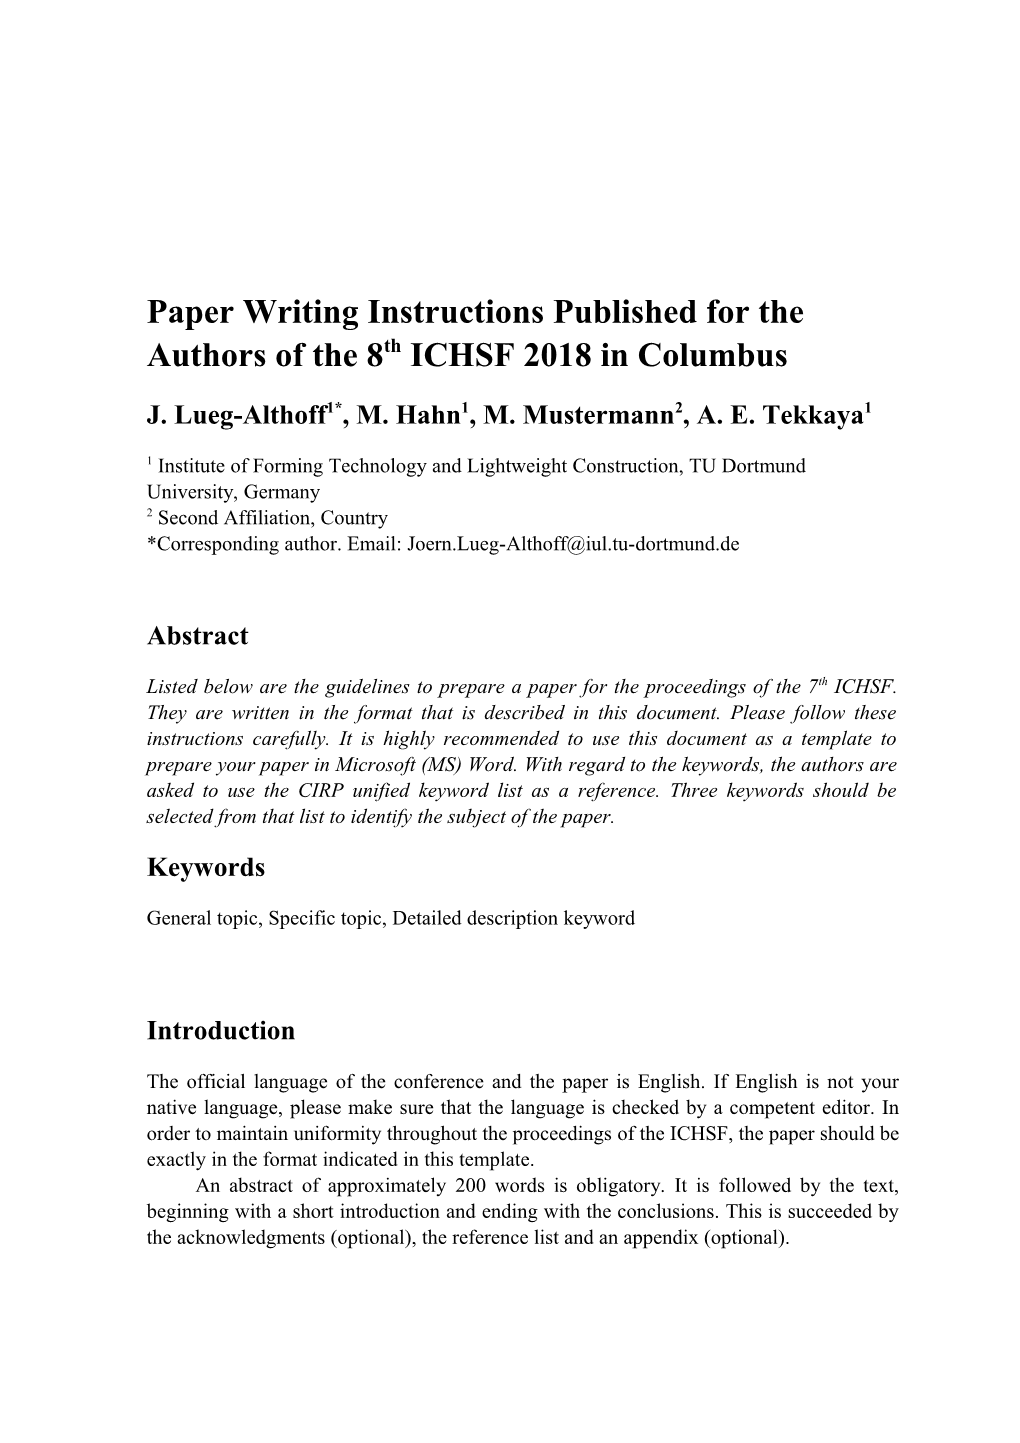 Paper Writing Instructions Published for the Authors of the 8Thichsf 2018 in Columbus